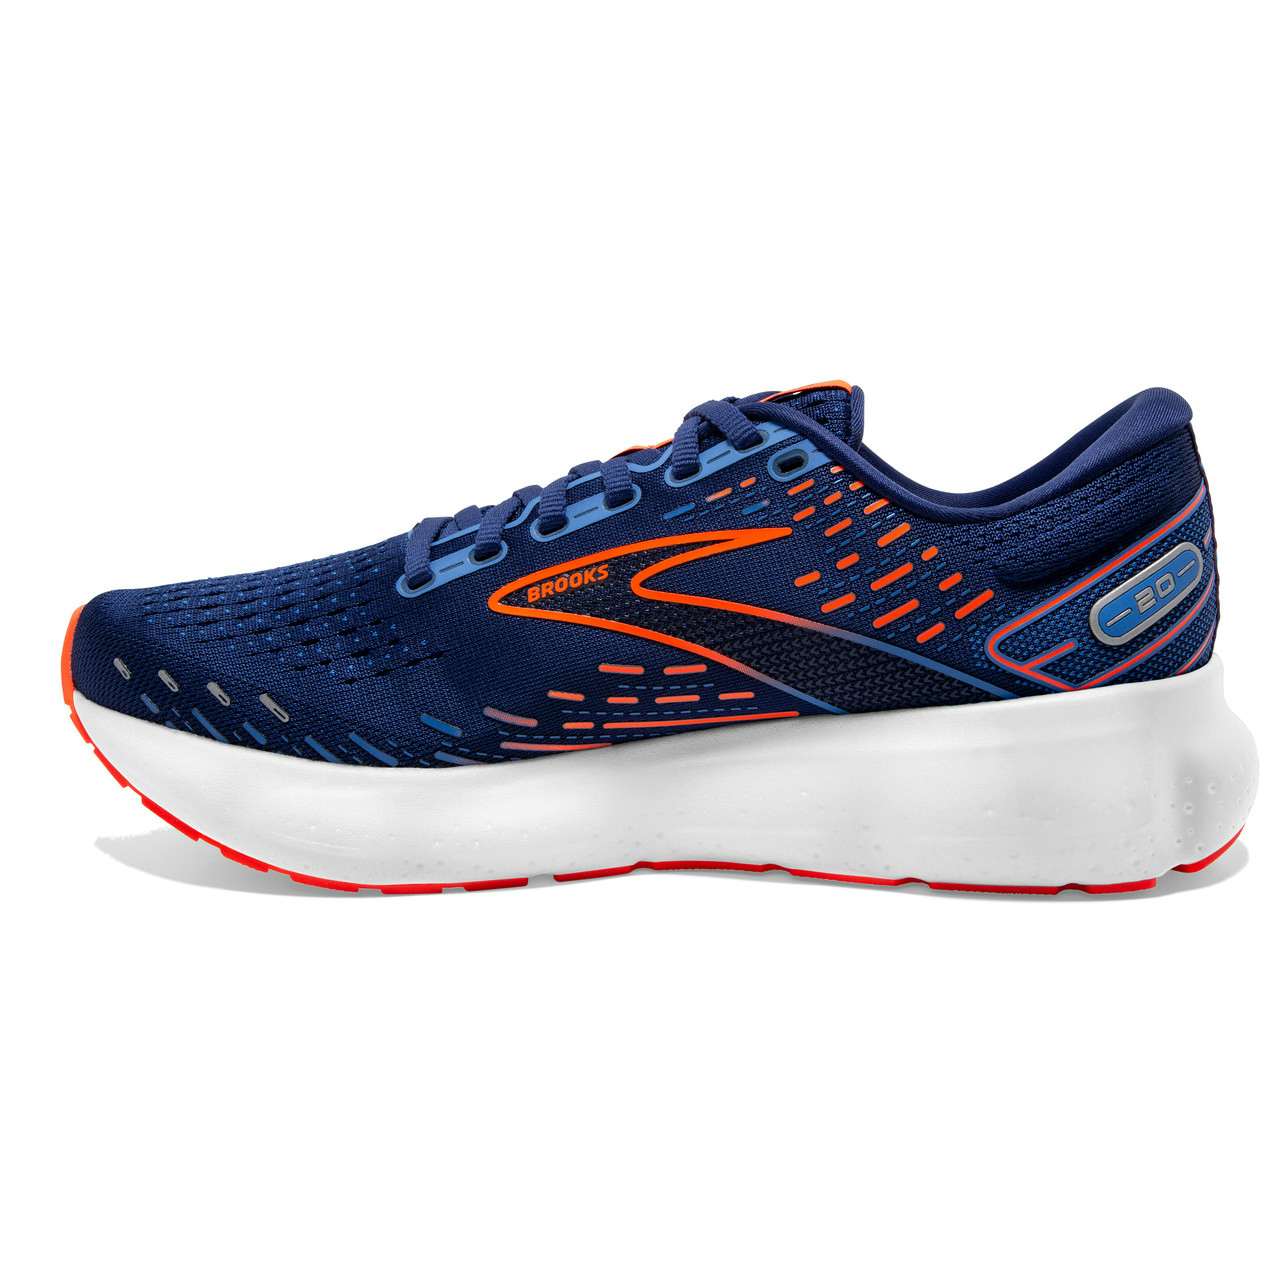 Glycerin 20 Road Running Shoes Blue Depths/Palace Blue/O